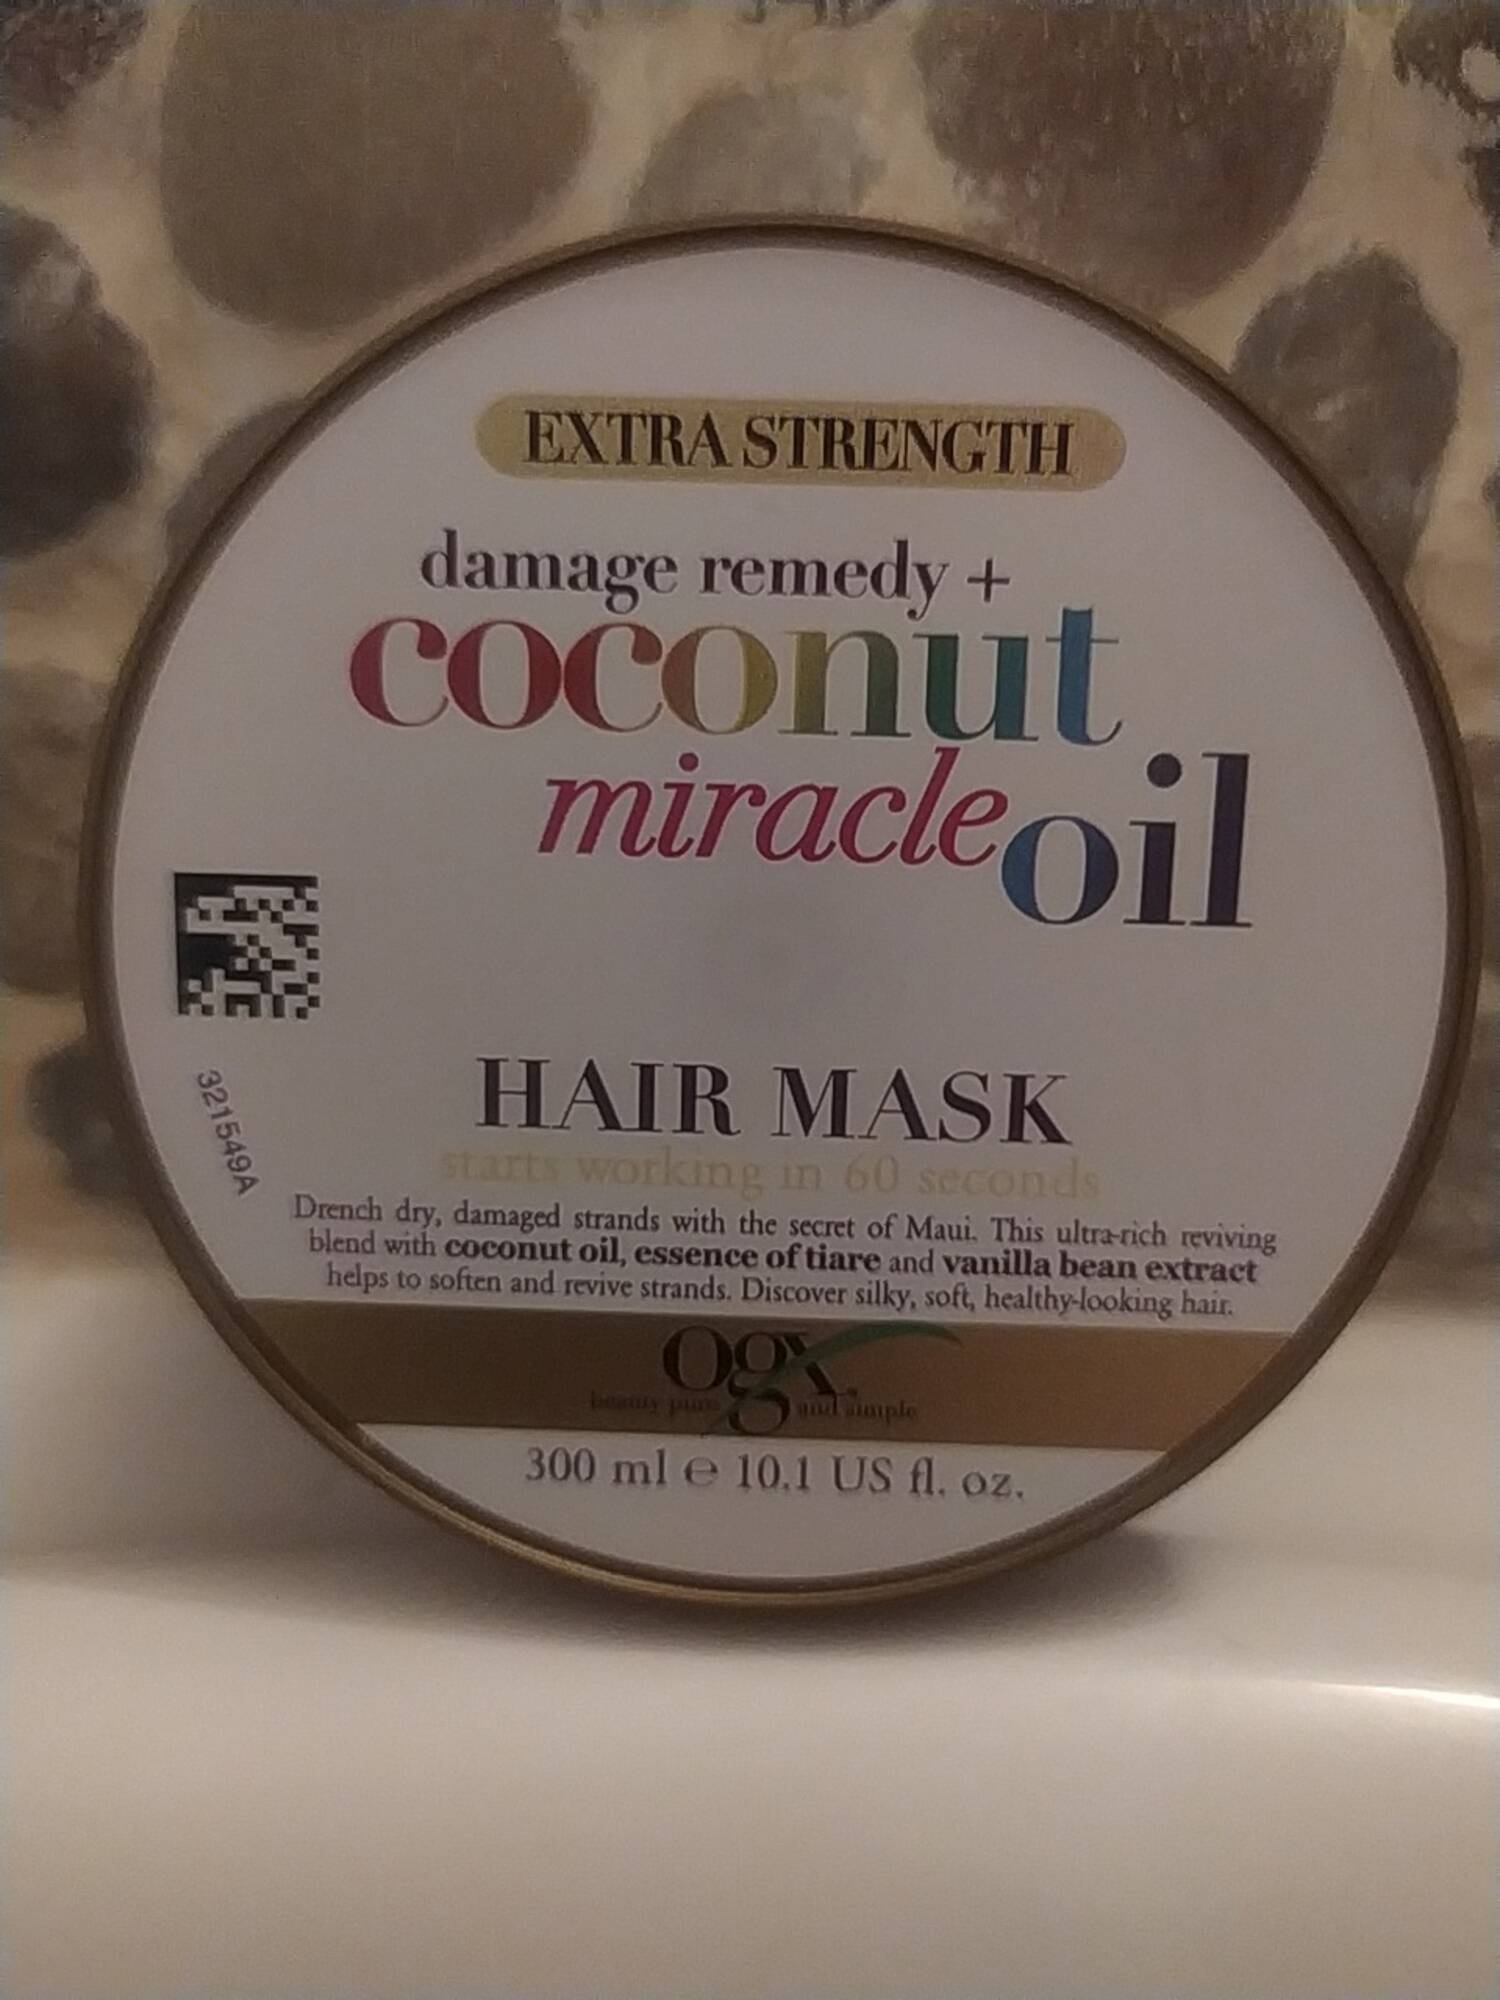 OGX - Extra strength coconut miracle oil - Hair mask 